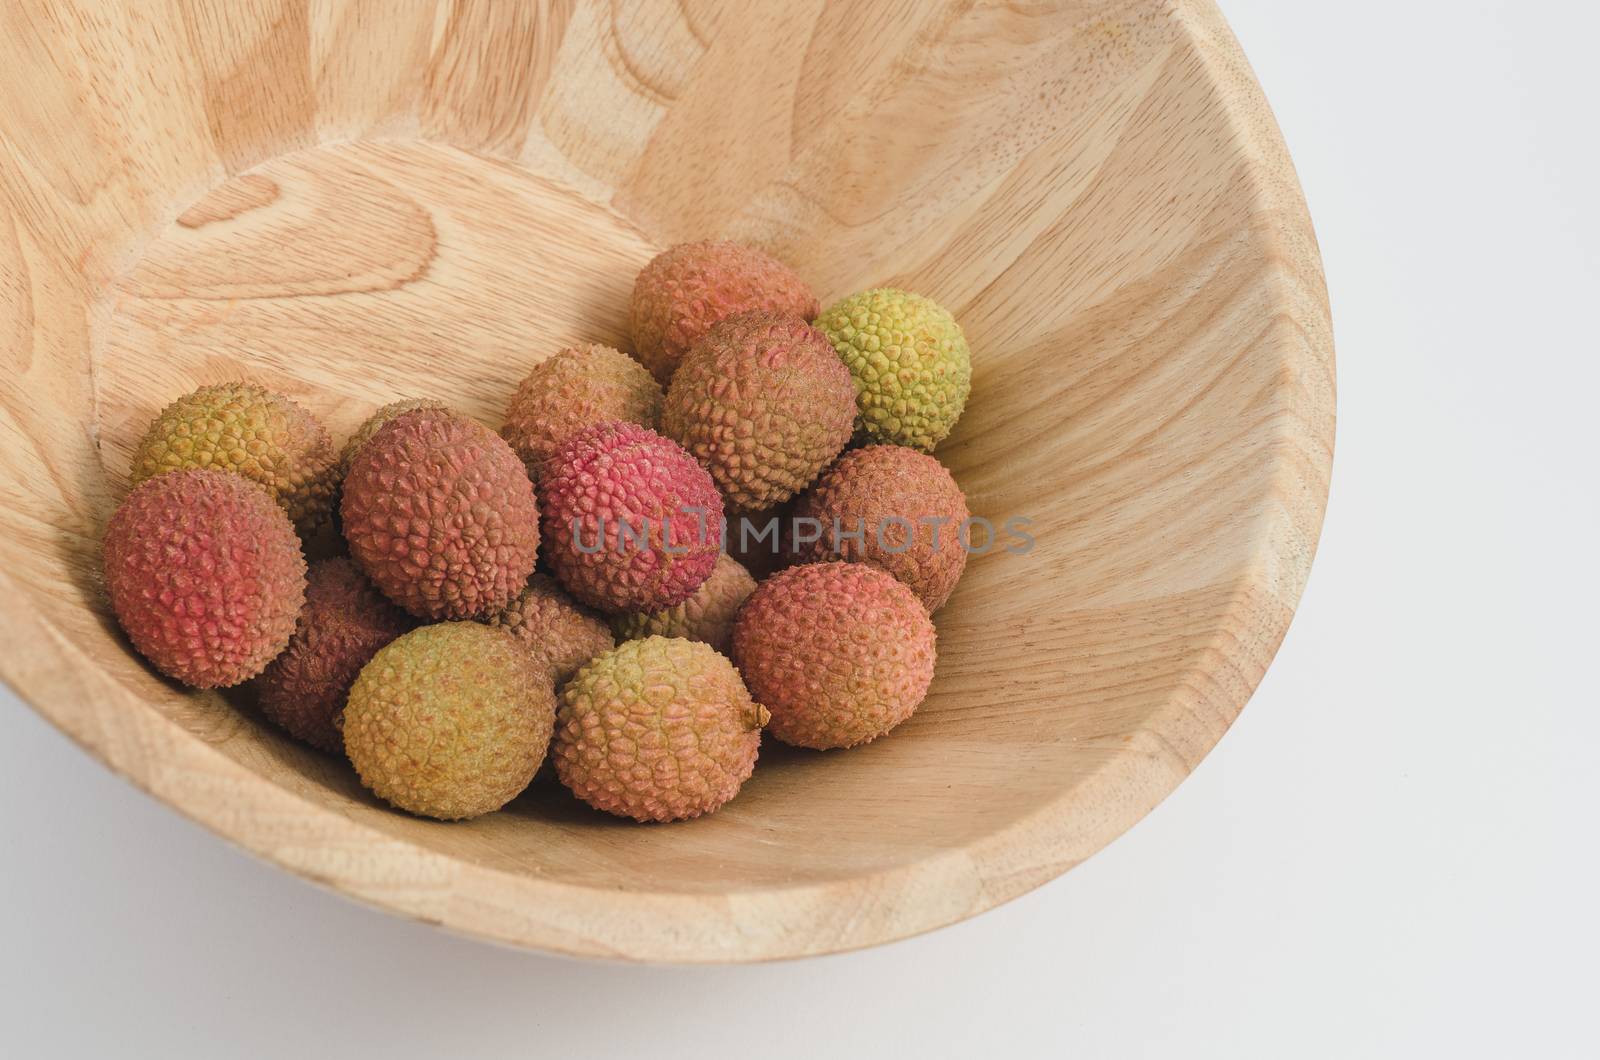 lychee fruit in a wooden bowl, white background